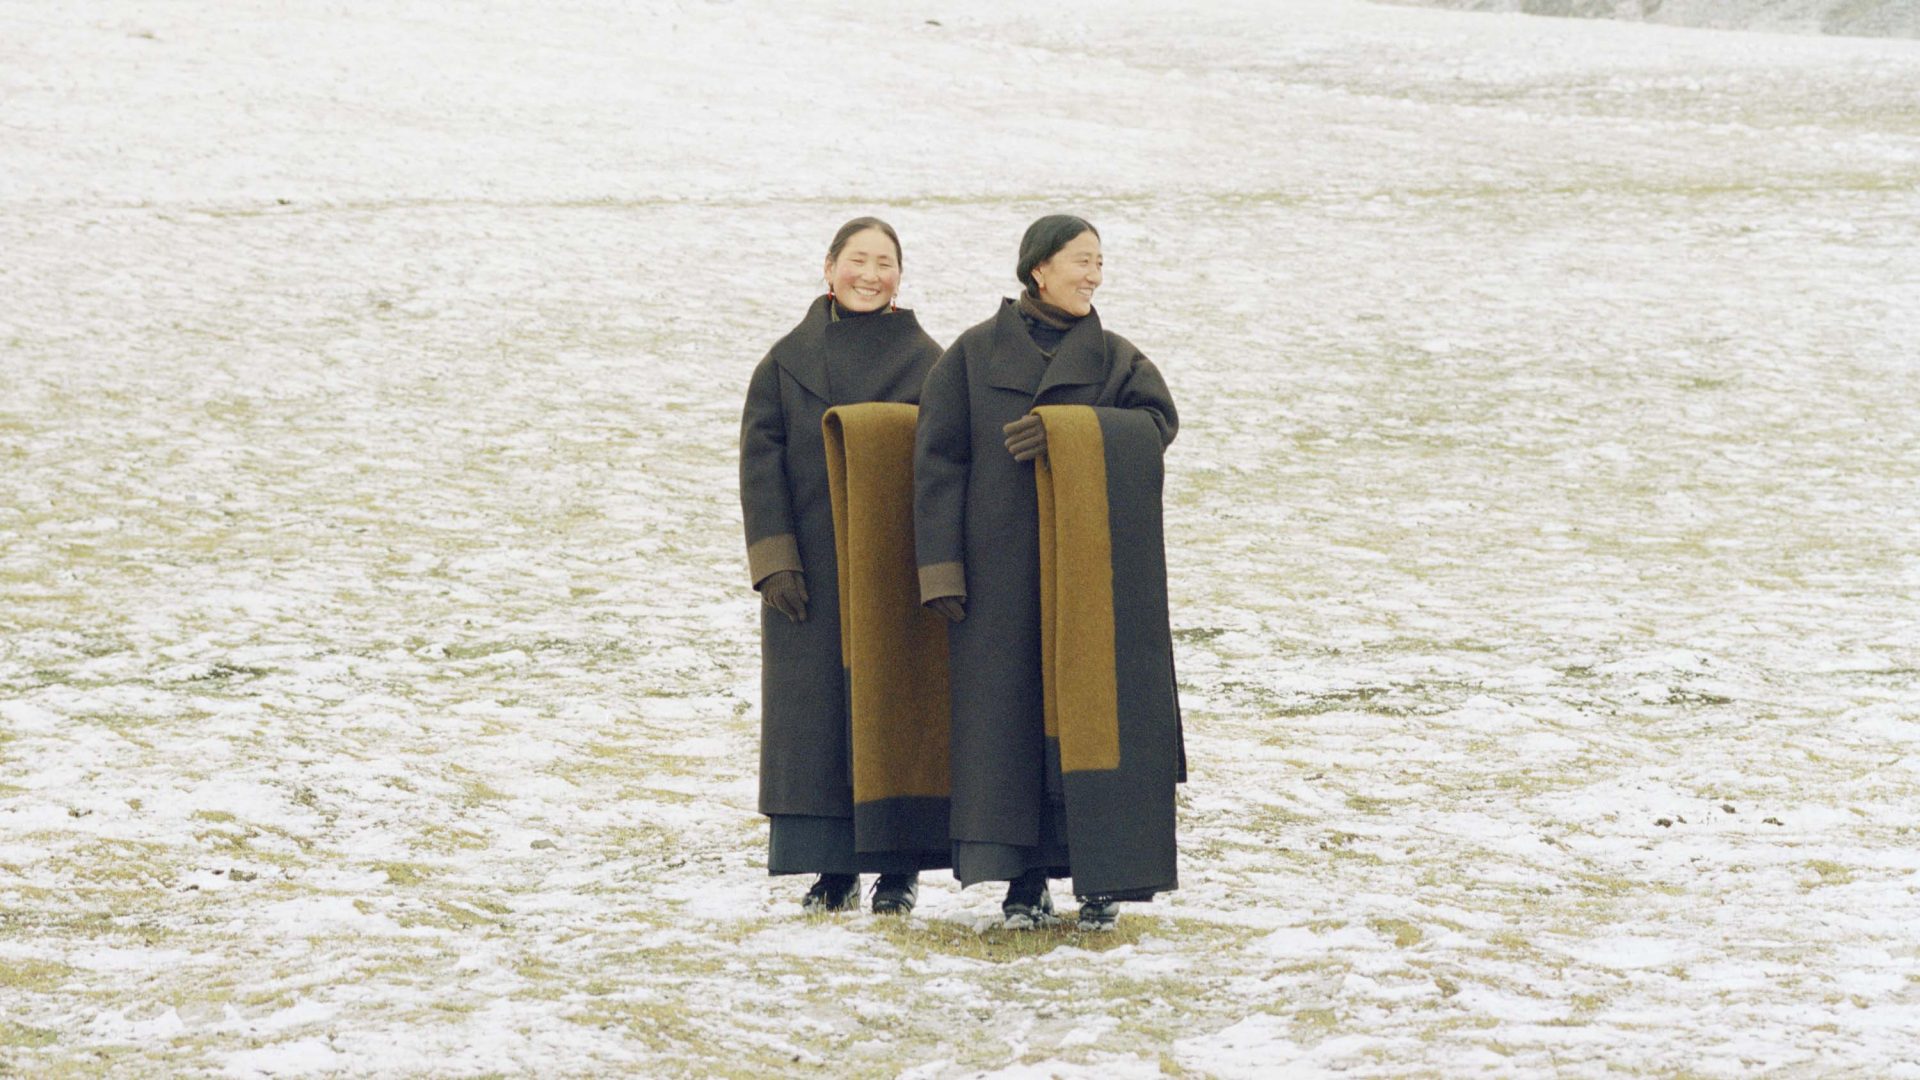 Two women wearing traditional textiles, standing in snow.